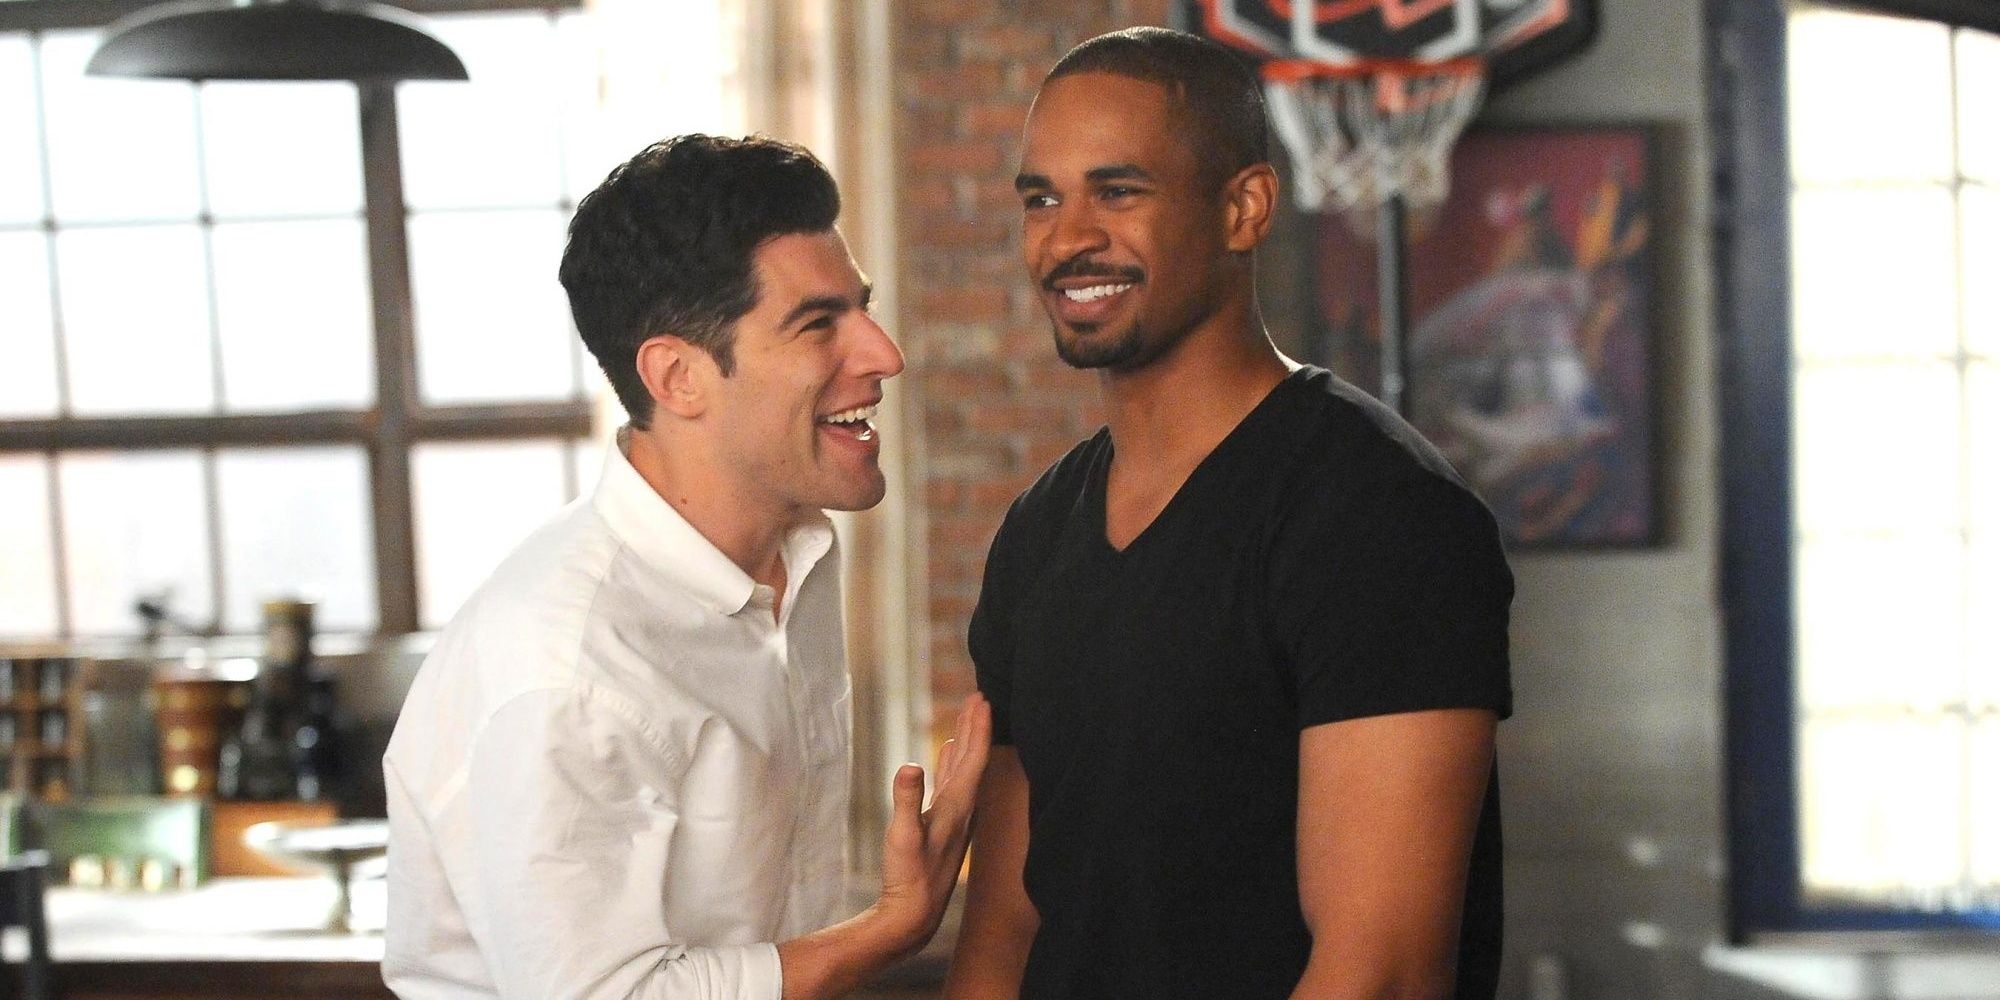 Schmidt and Coach laughing in New Girl. 